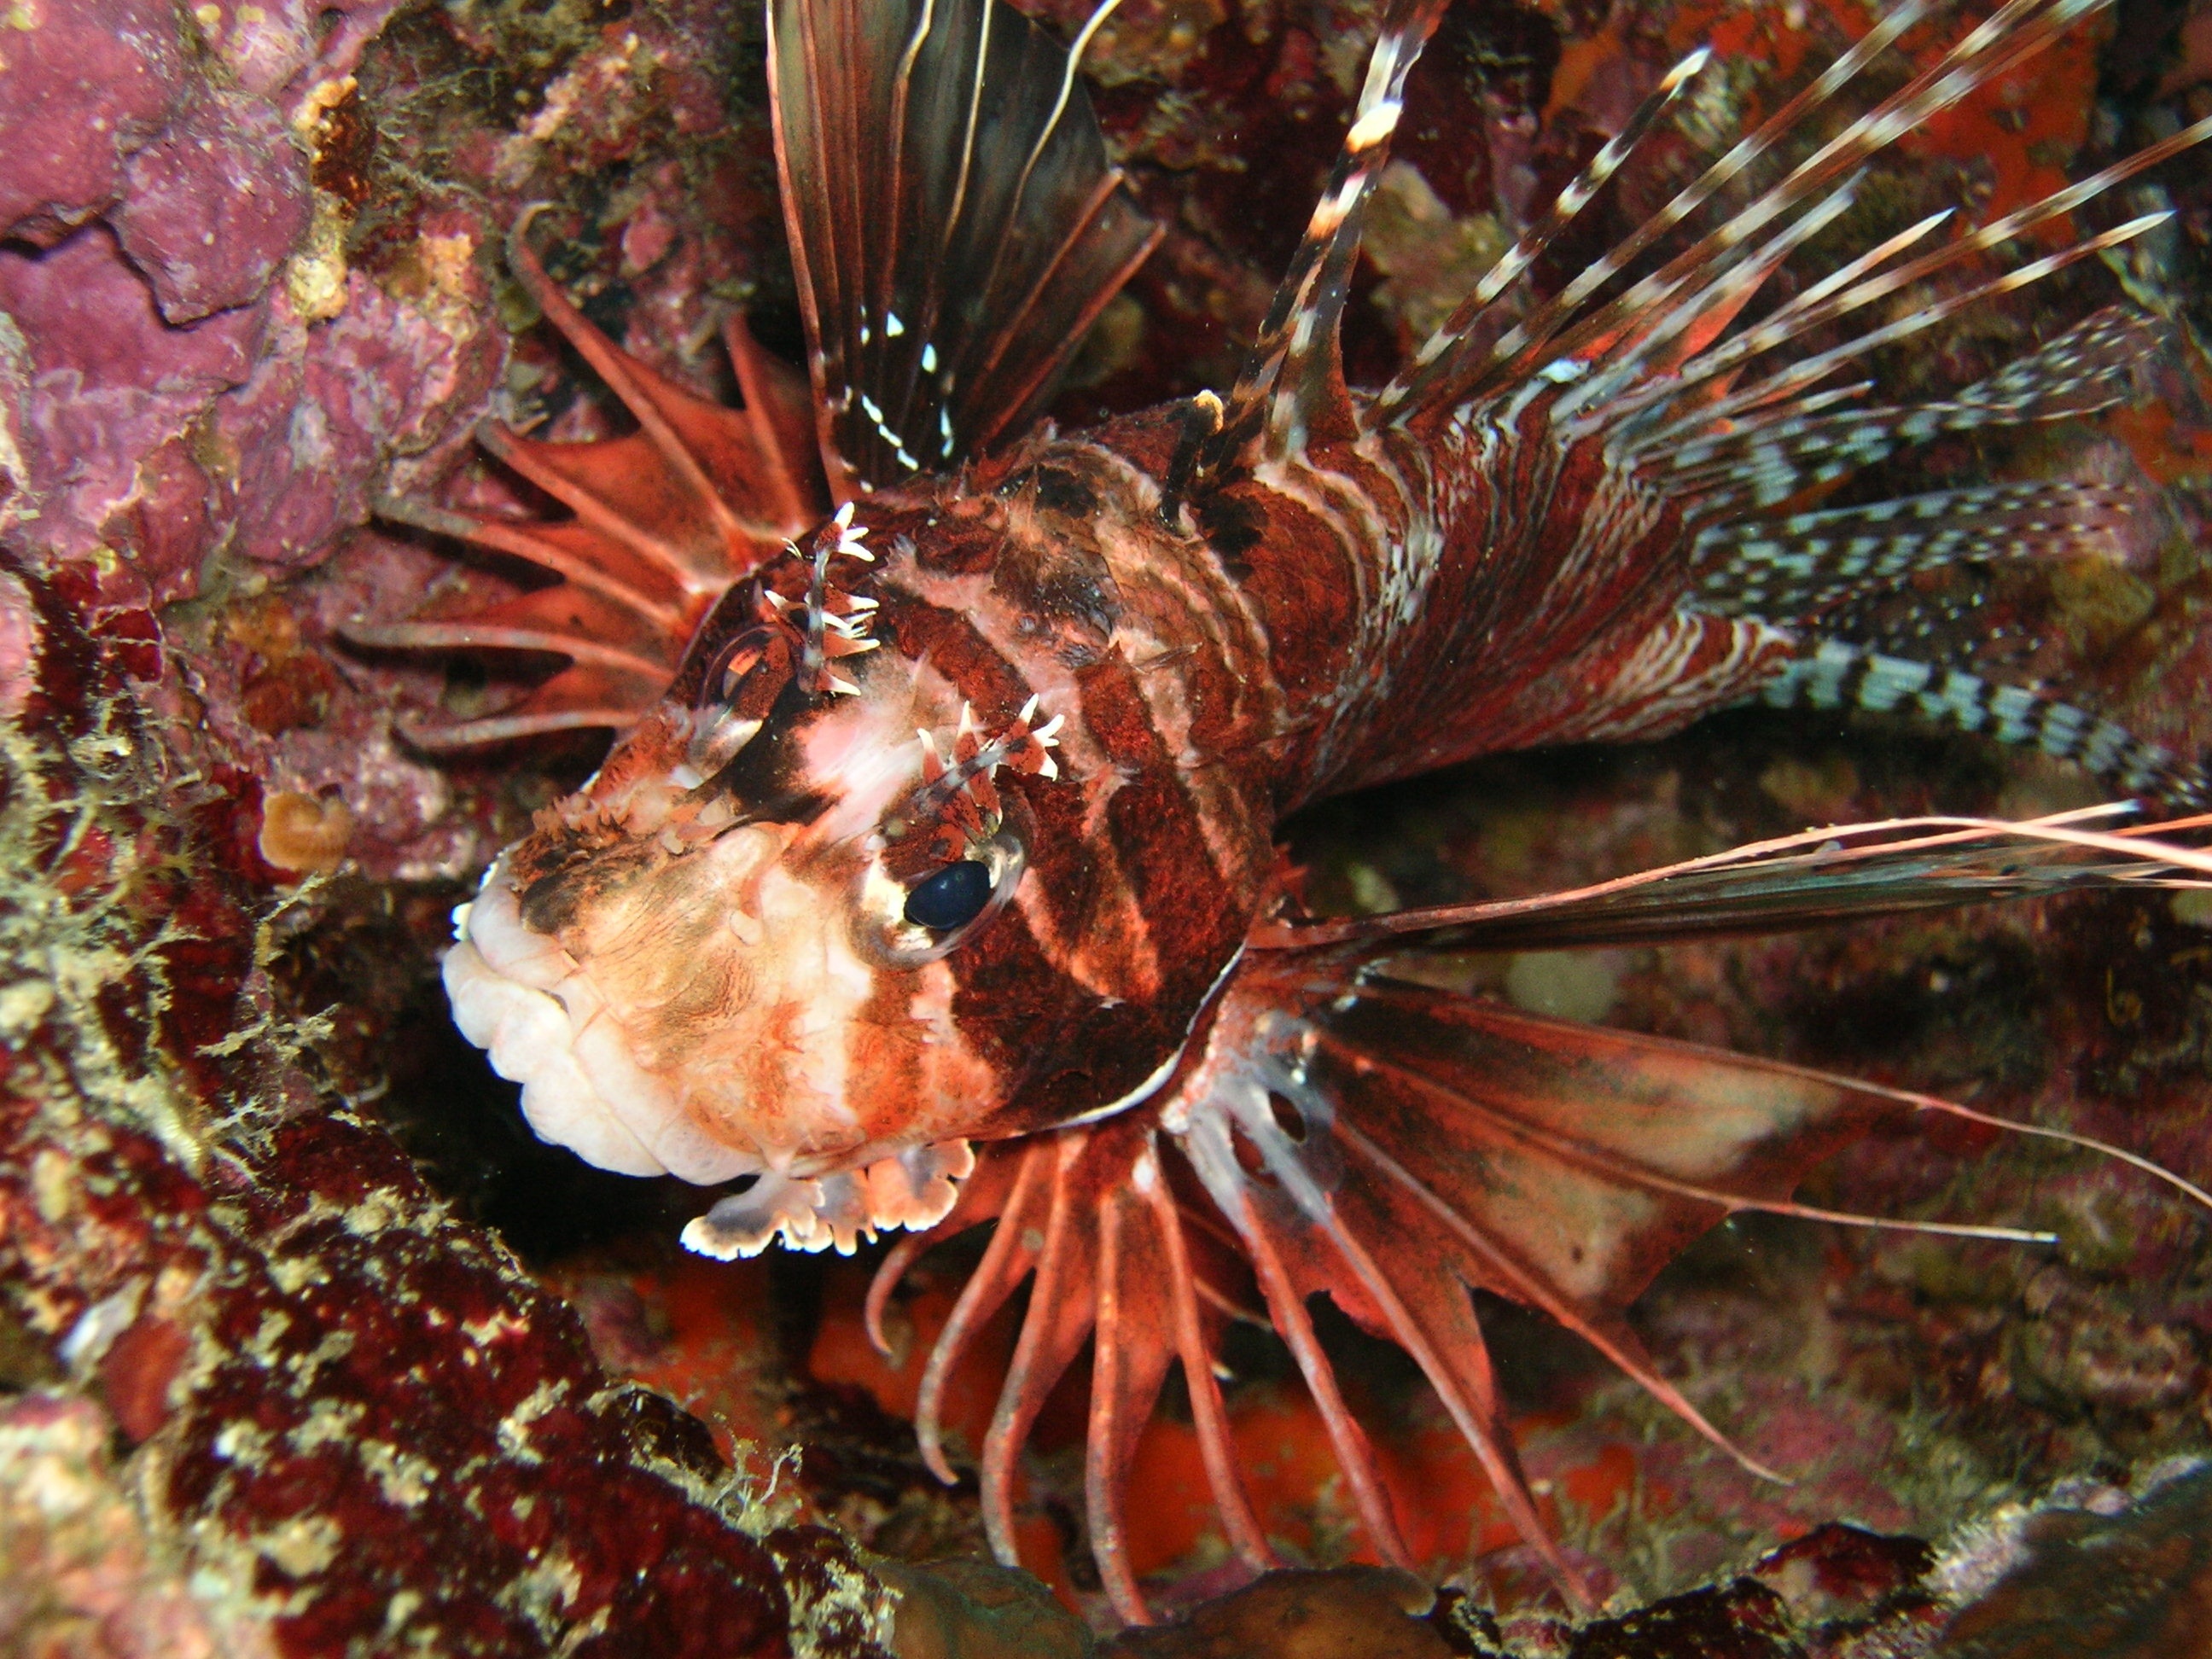 Brightly colored lionfish hovering over coral structures in Bonaire